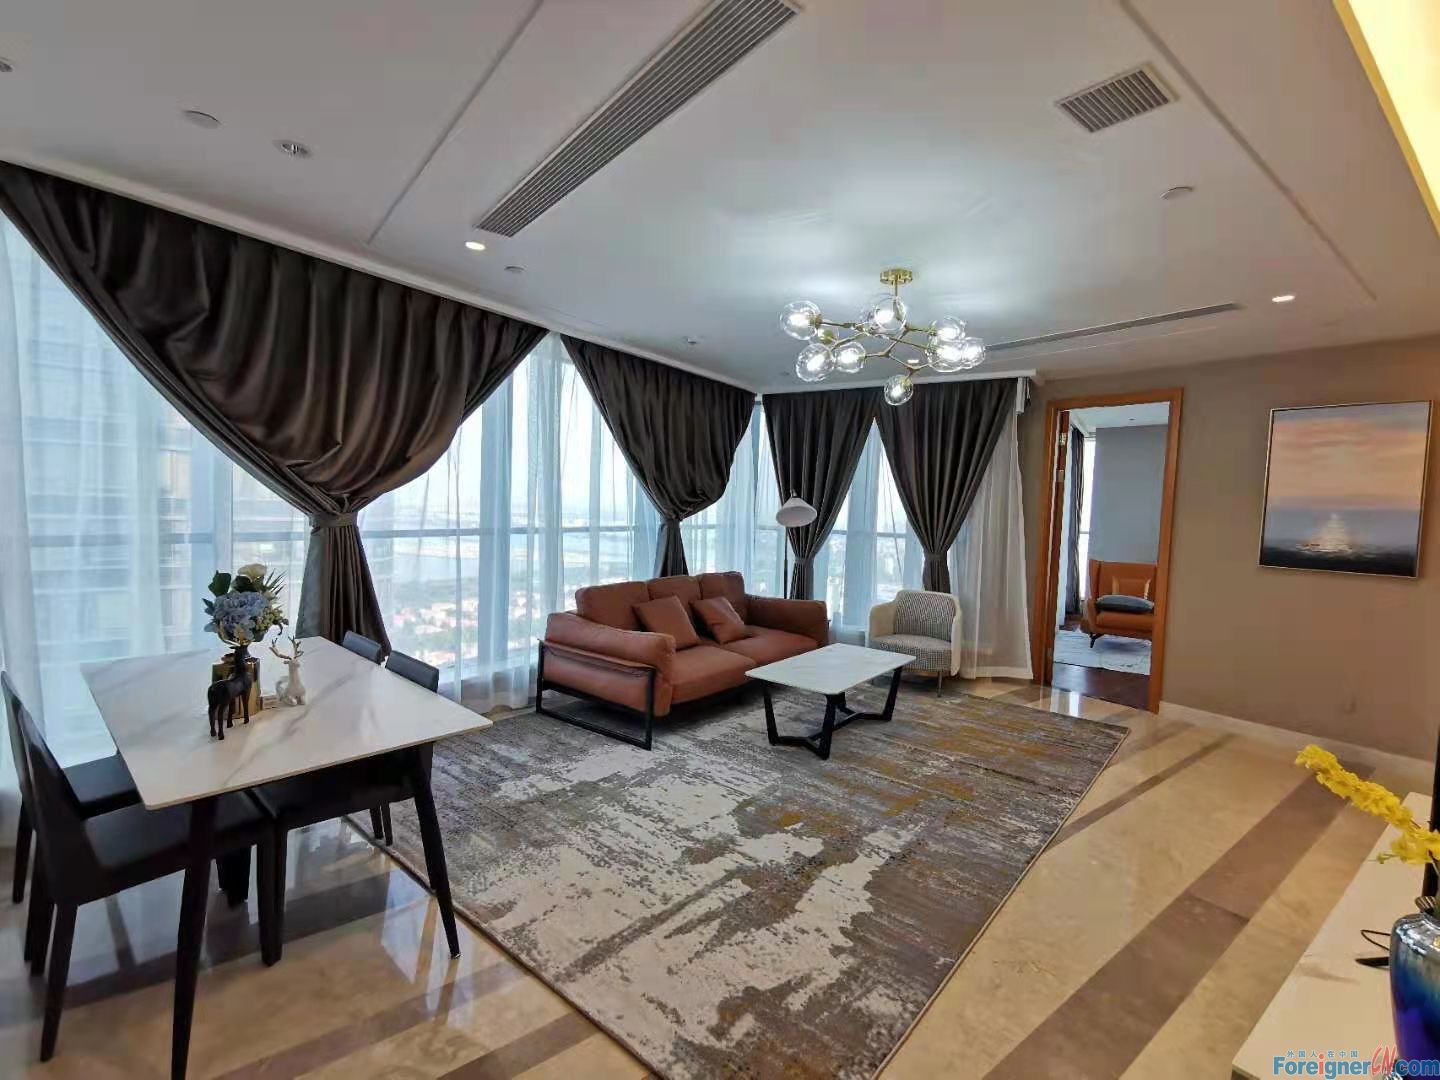 Nice!!! apartment, Suzhou Center No.9, 2 bedrooms and 2 bathrooms, with Jinji Lakeview!